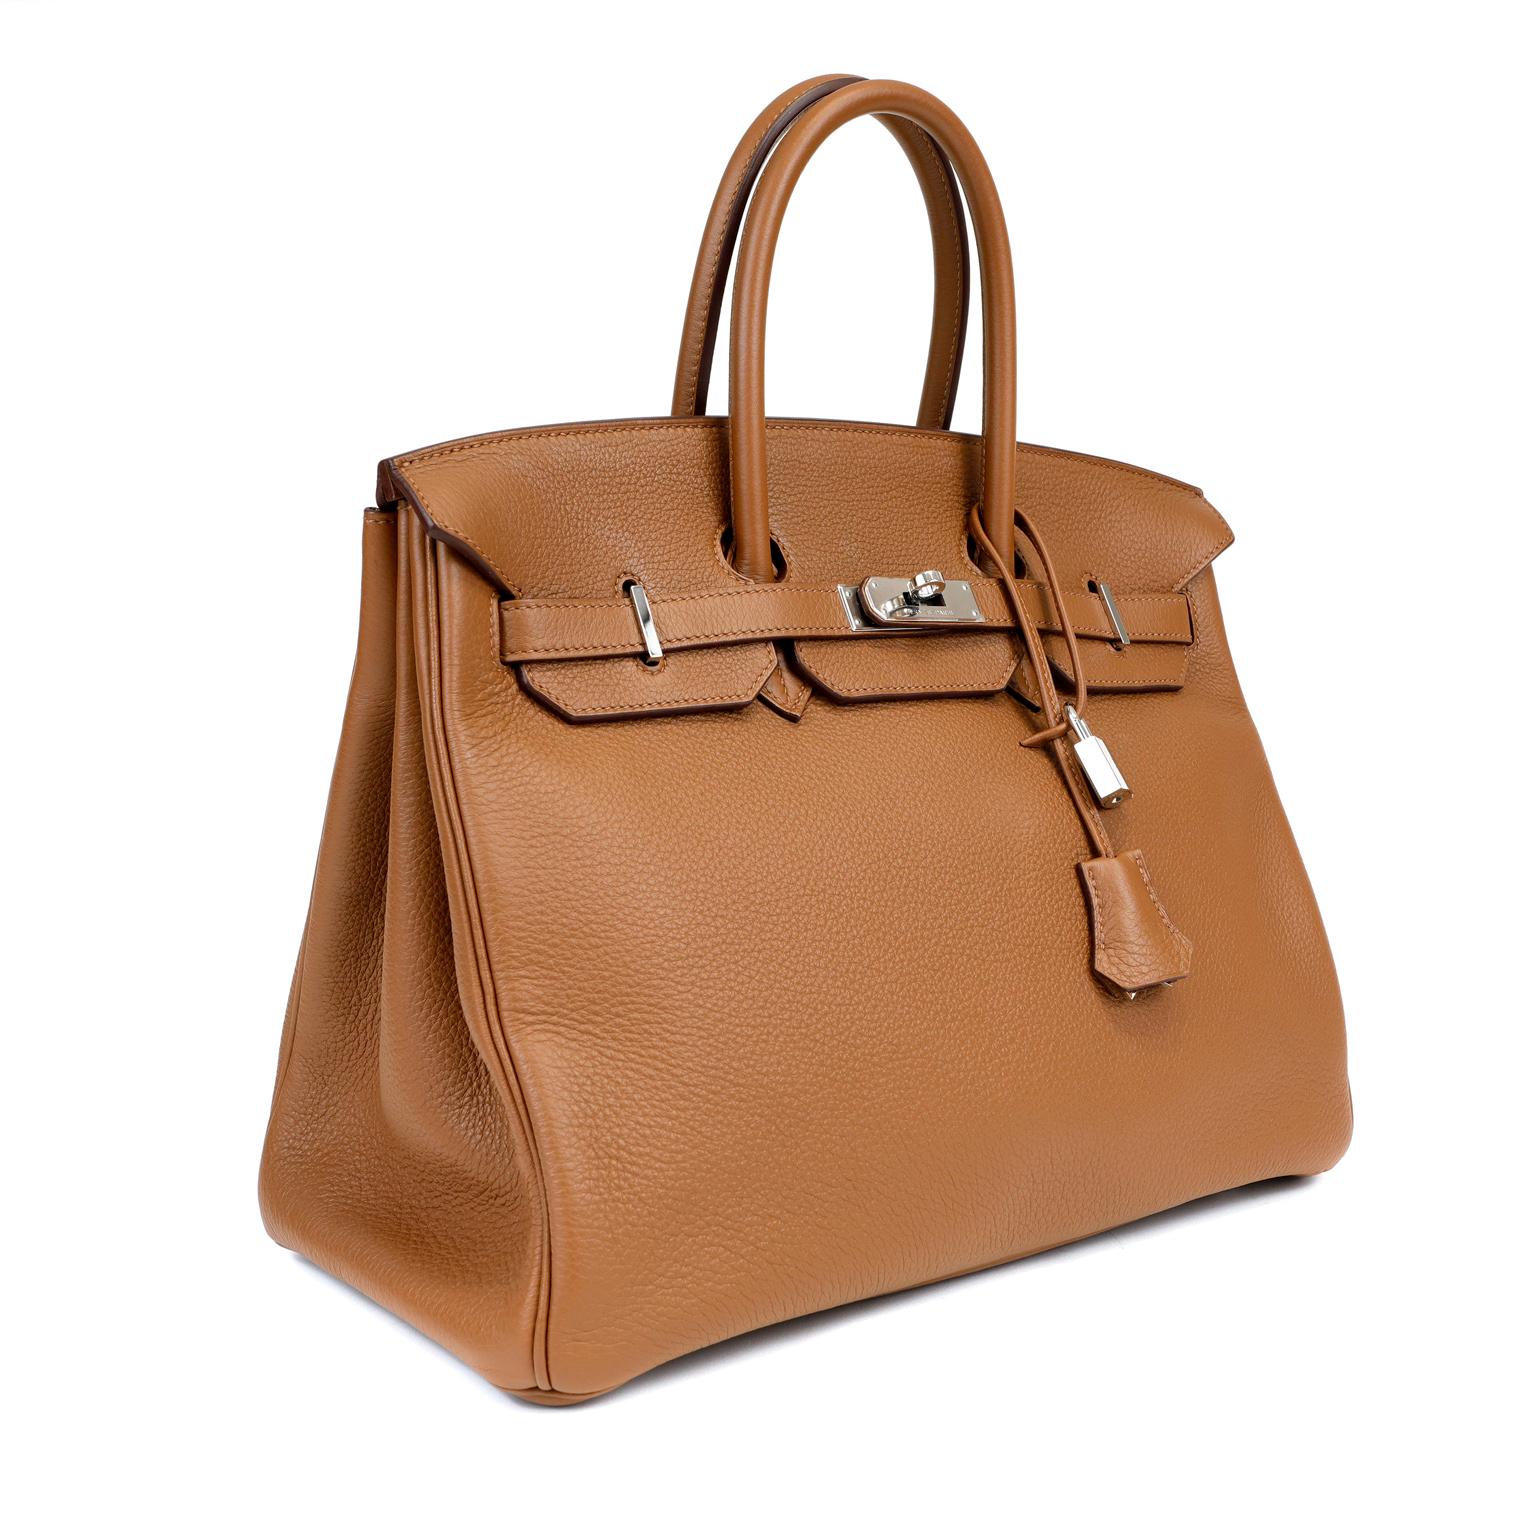 This authentic Hermès Caramel Togo 35 cm Birkin Bag is in pristine unworn condition with plastic intact on the hardware.  Waitlists exceeding a year are commonplace for the intensely coveted classic leather Birkin. Each piece is hand sewn by skilled